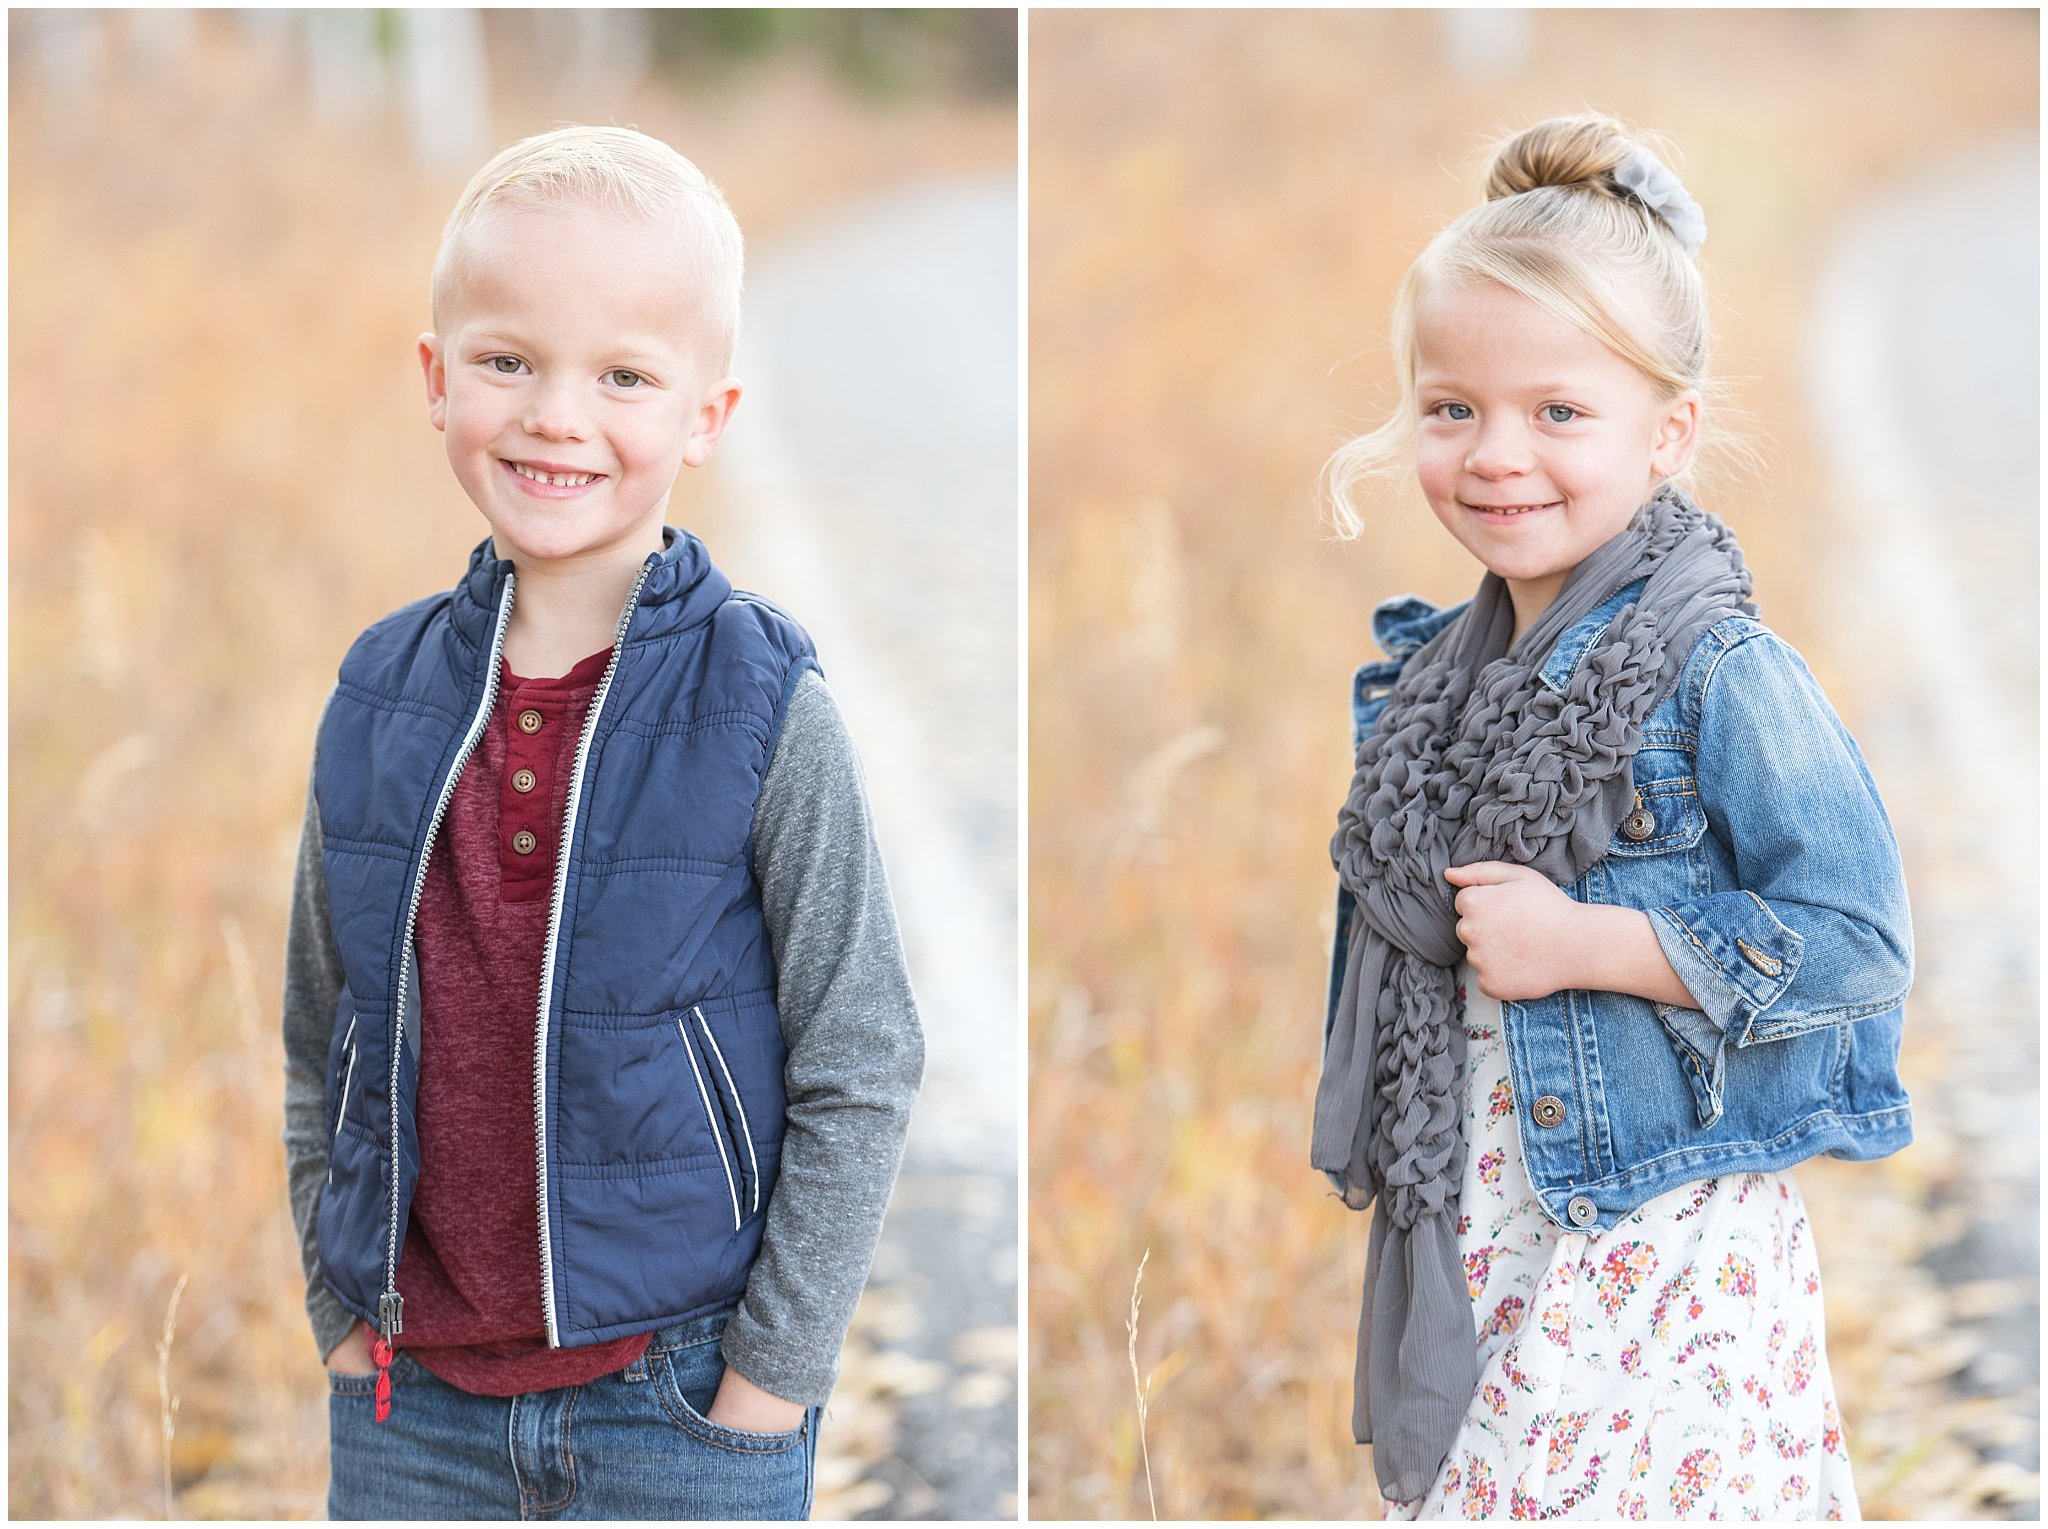 Portraits of twin brother and sister | Fall Family Pictures in the Mountains | Snowbasin, Utah | Jessie and Dallin Photography